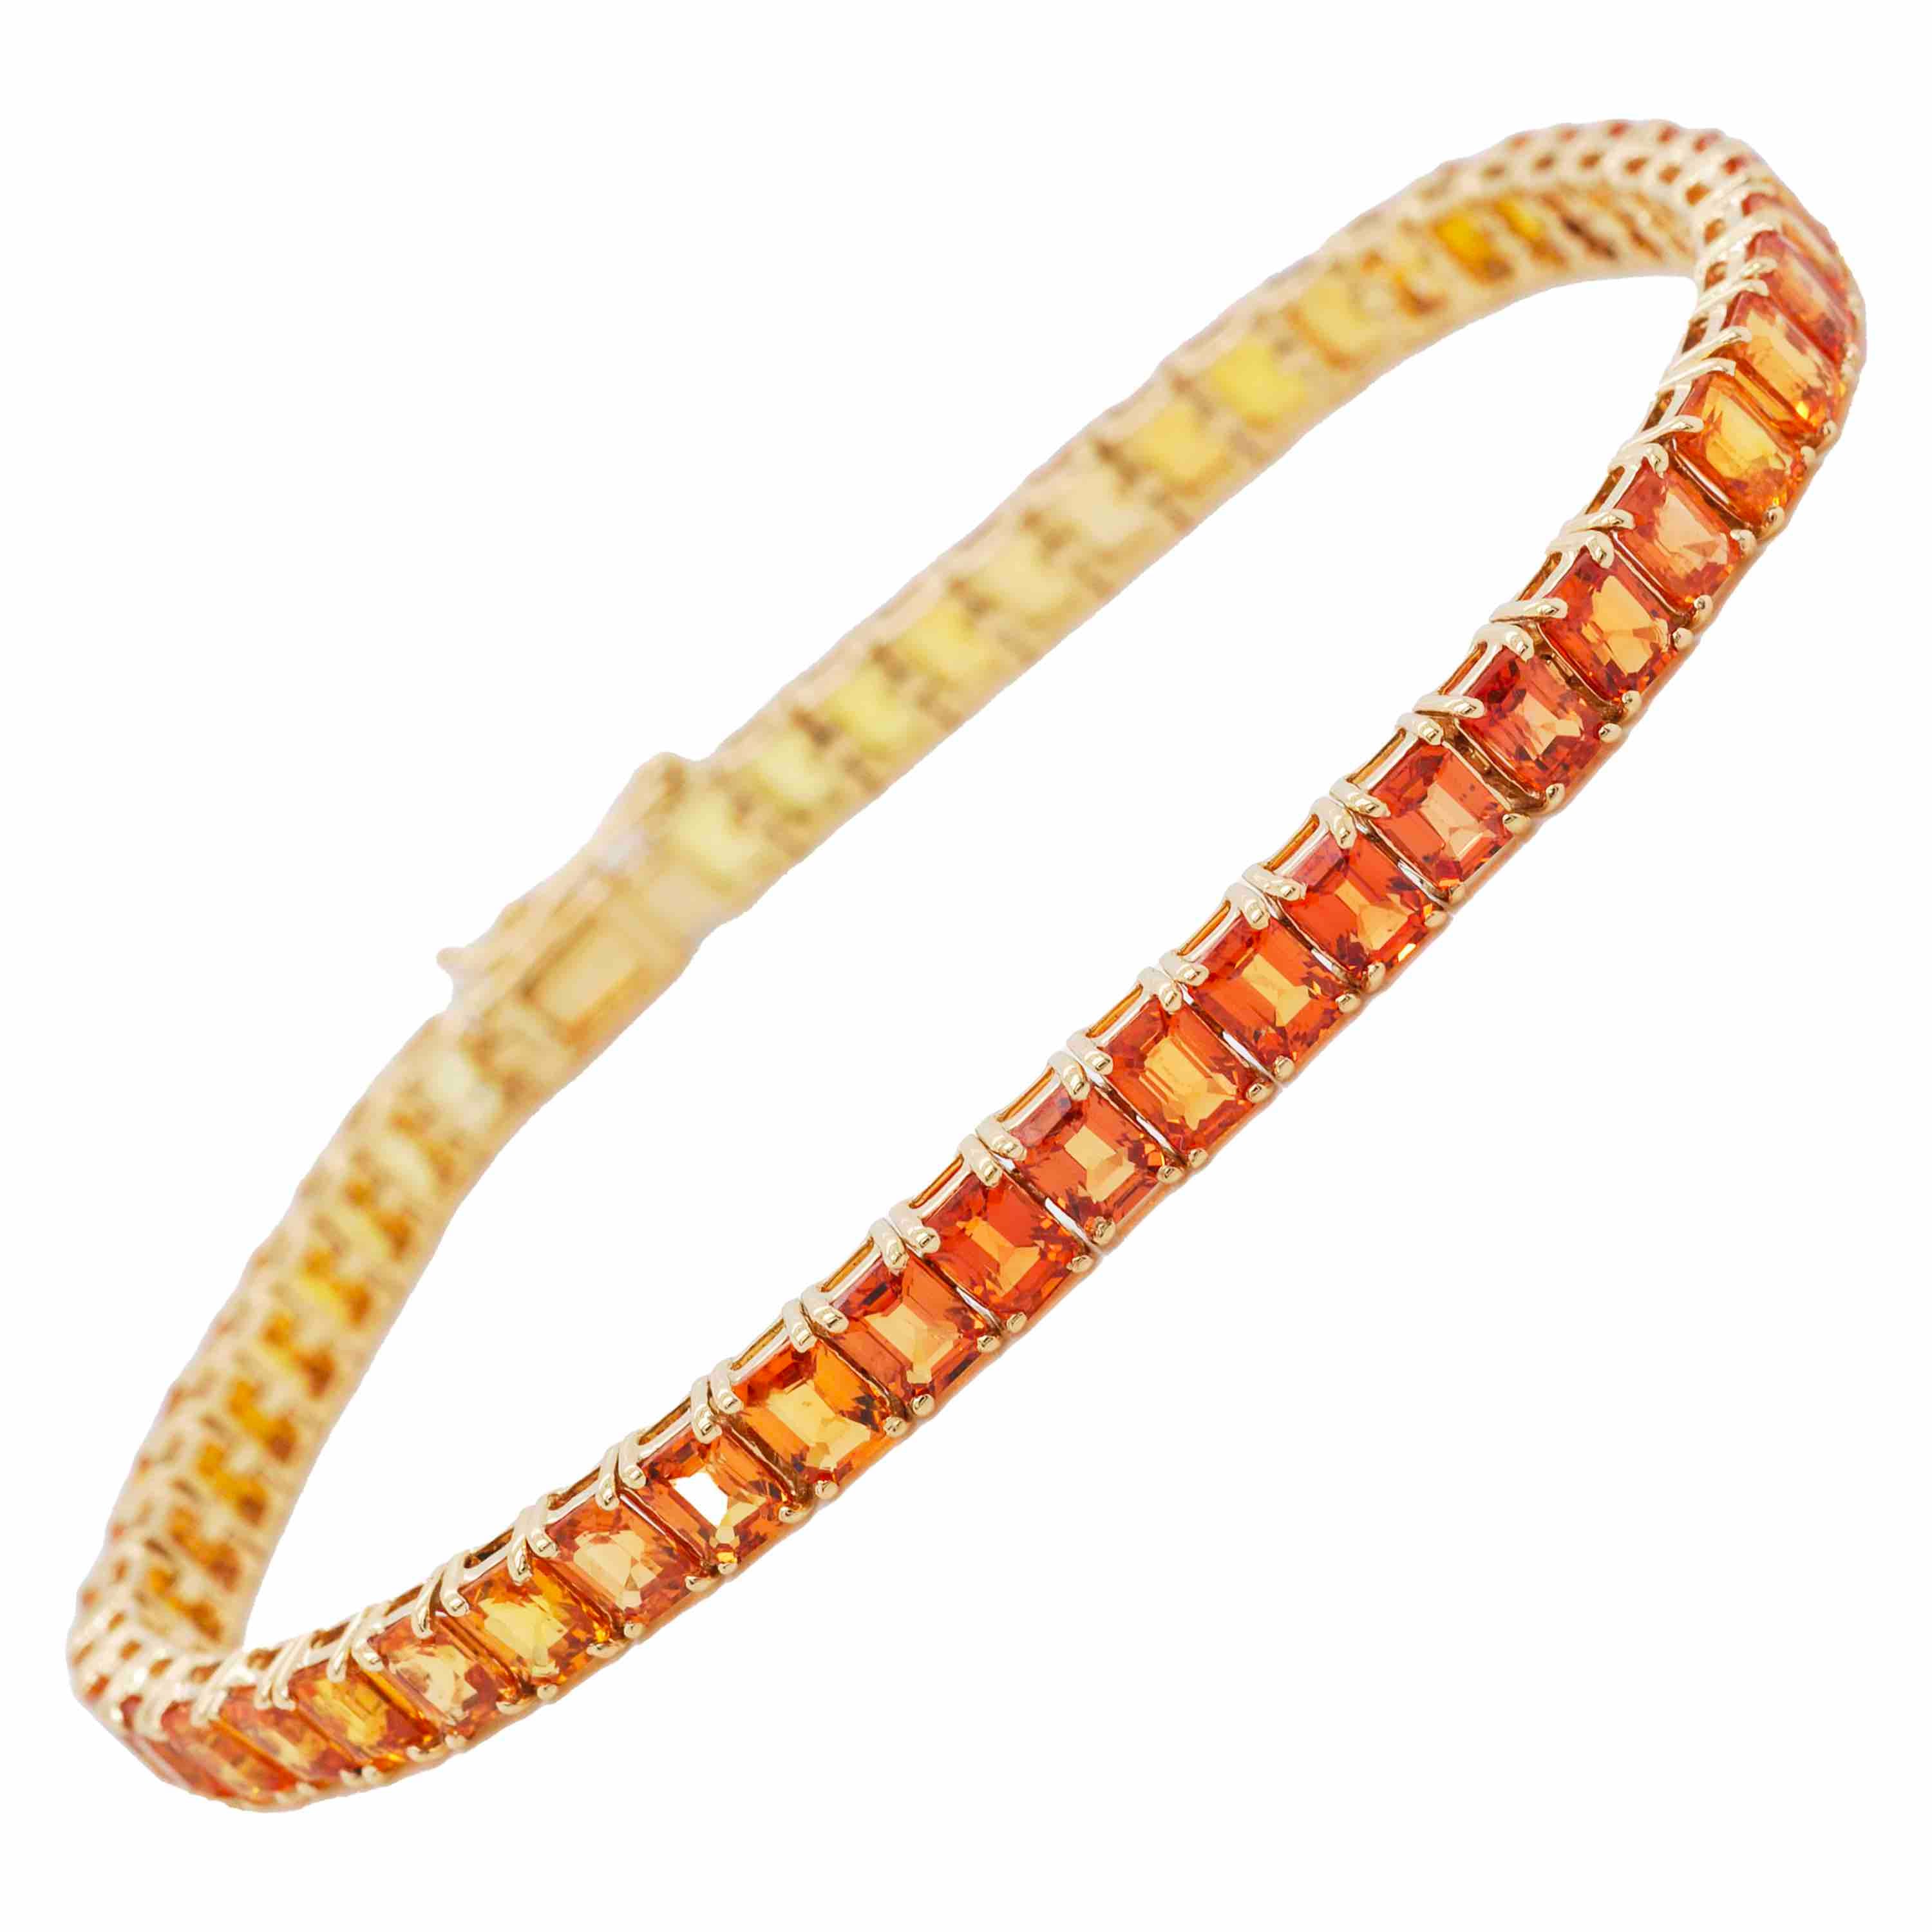 1.5ct NATURAL YELLOW SAPPHIRE STACKING RING WEDDING BAND 14k GOLD BAGUETTE  CUT